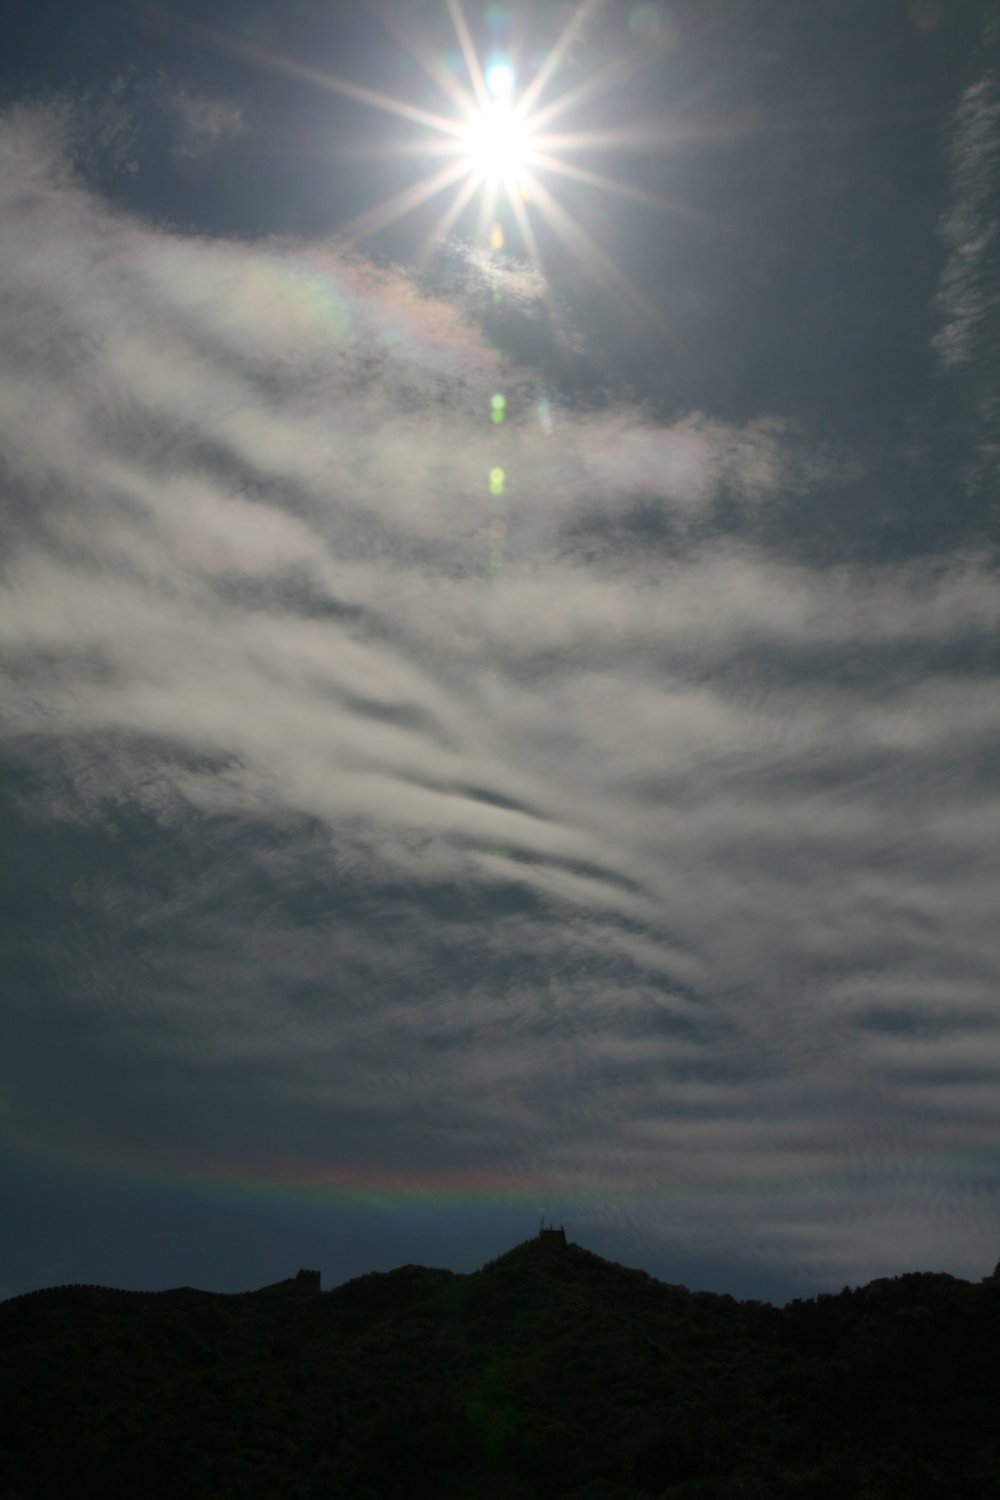 Circumhorizon arc with nacreous clouds over Chinese Great Wall: 99 KB; click on the image to enlarge to 1000x1500 pixel